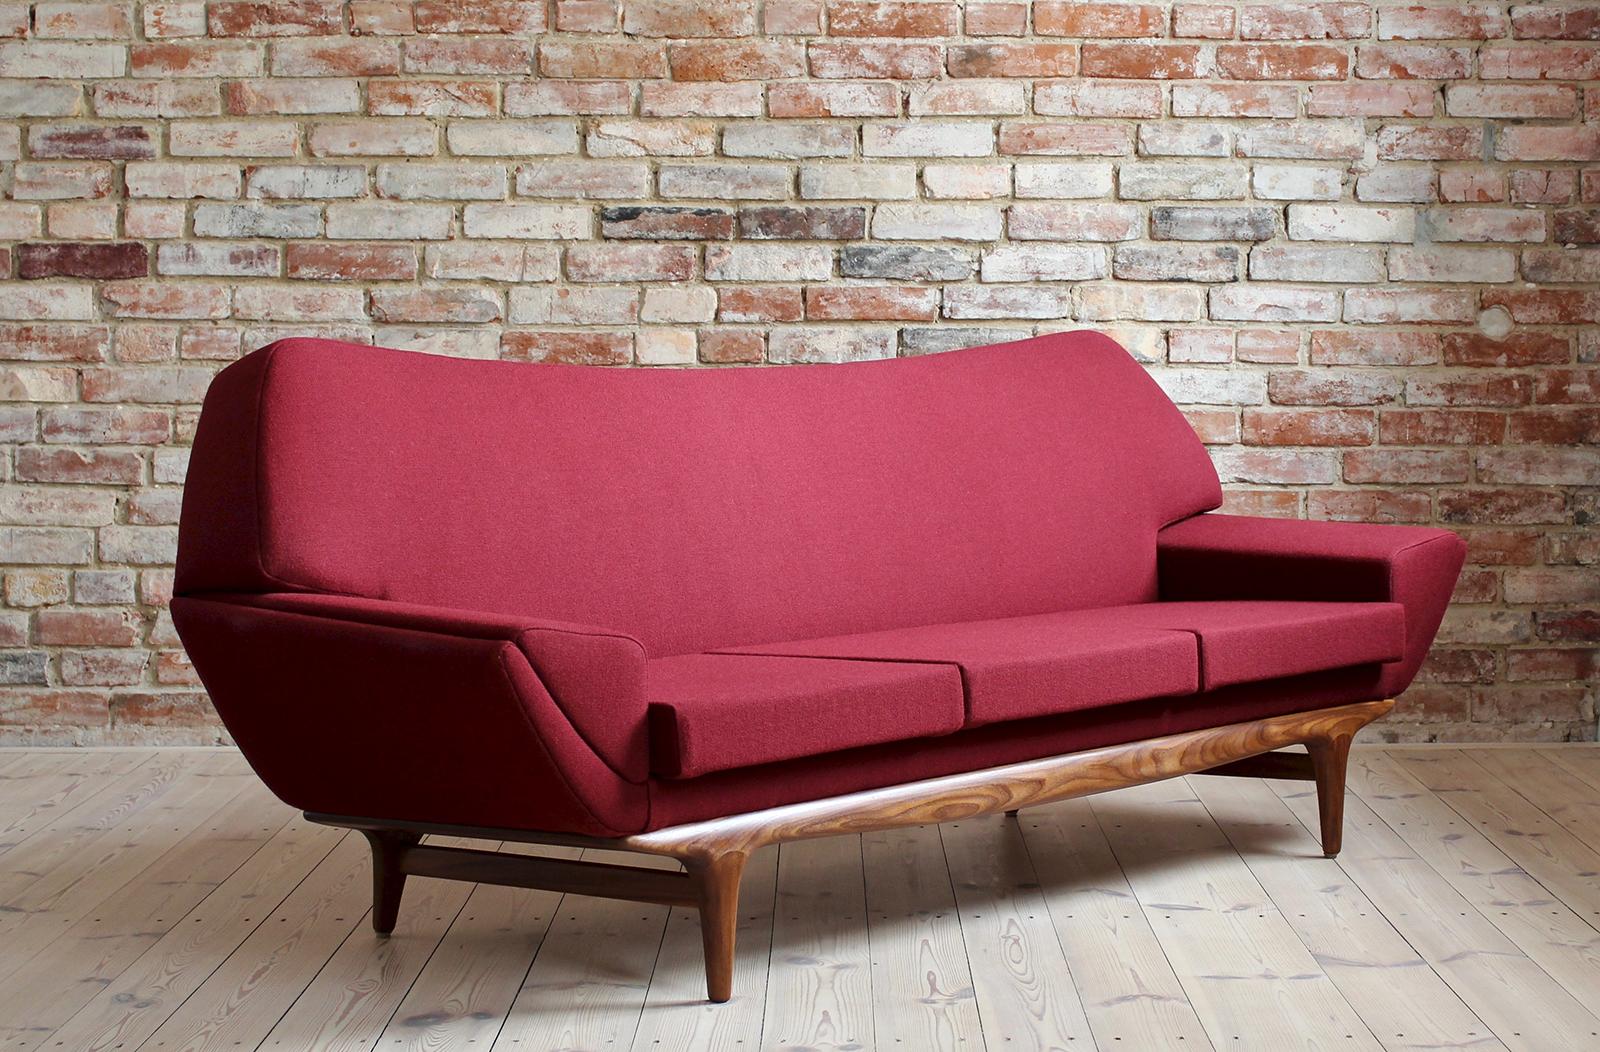 Mid-Century Modern Johannes Andersen Sofa for AB Trensums reupholstered in Kvadrat Fabric, 1950s